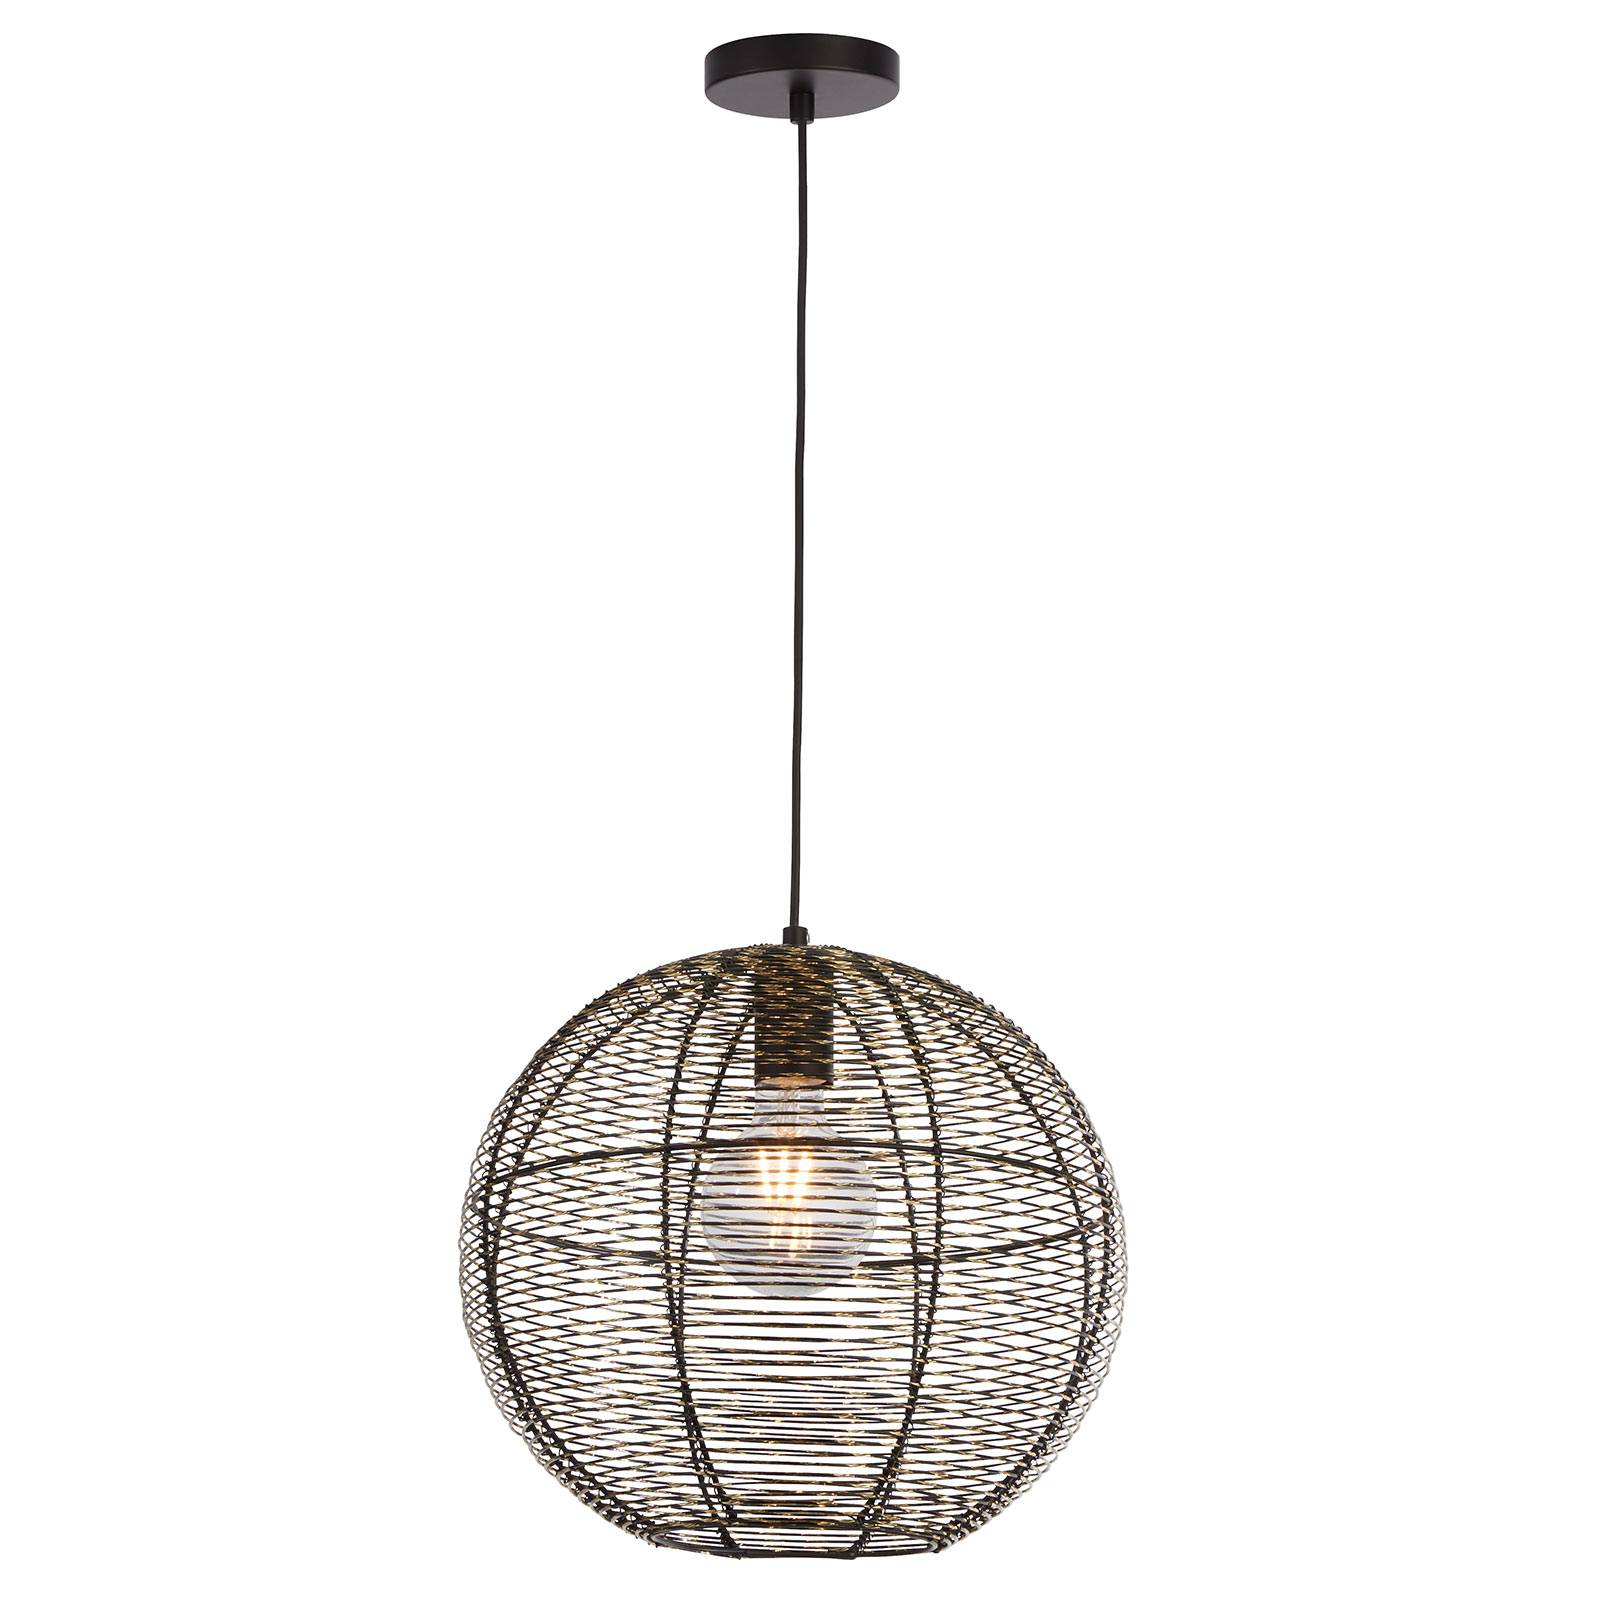 Weave hanging light, cage lampshade in black/gold